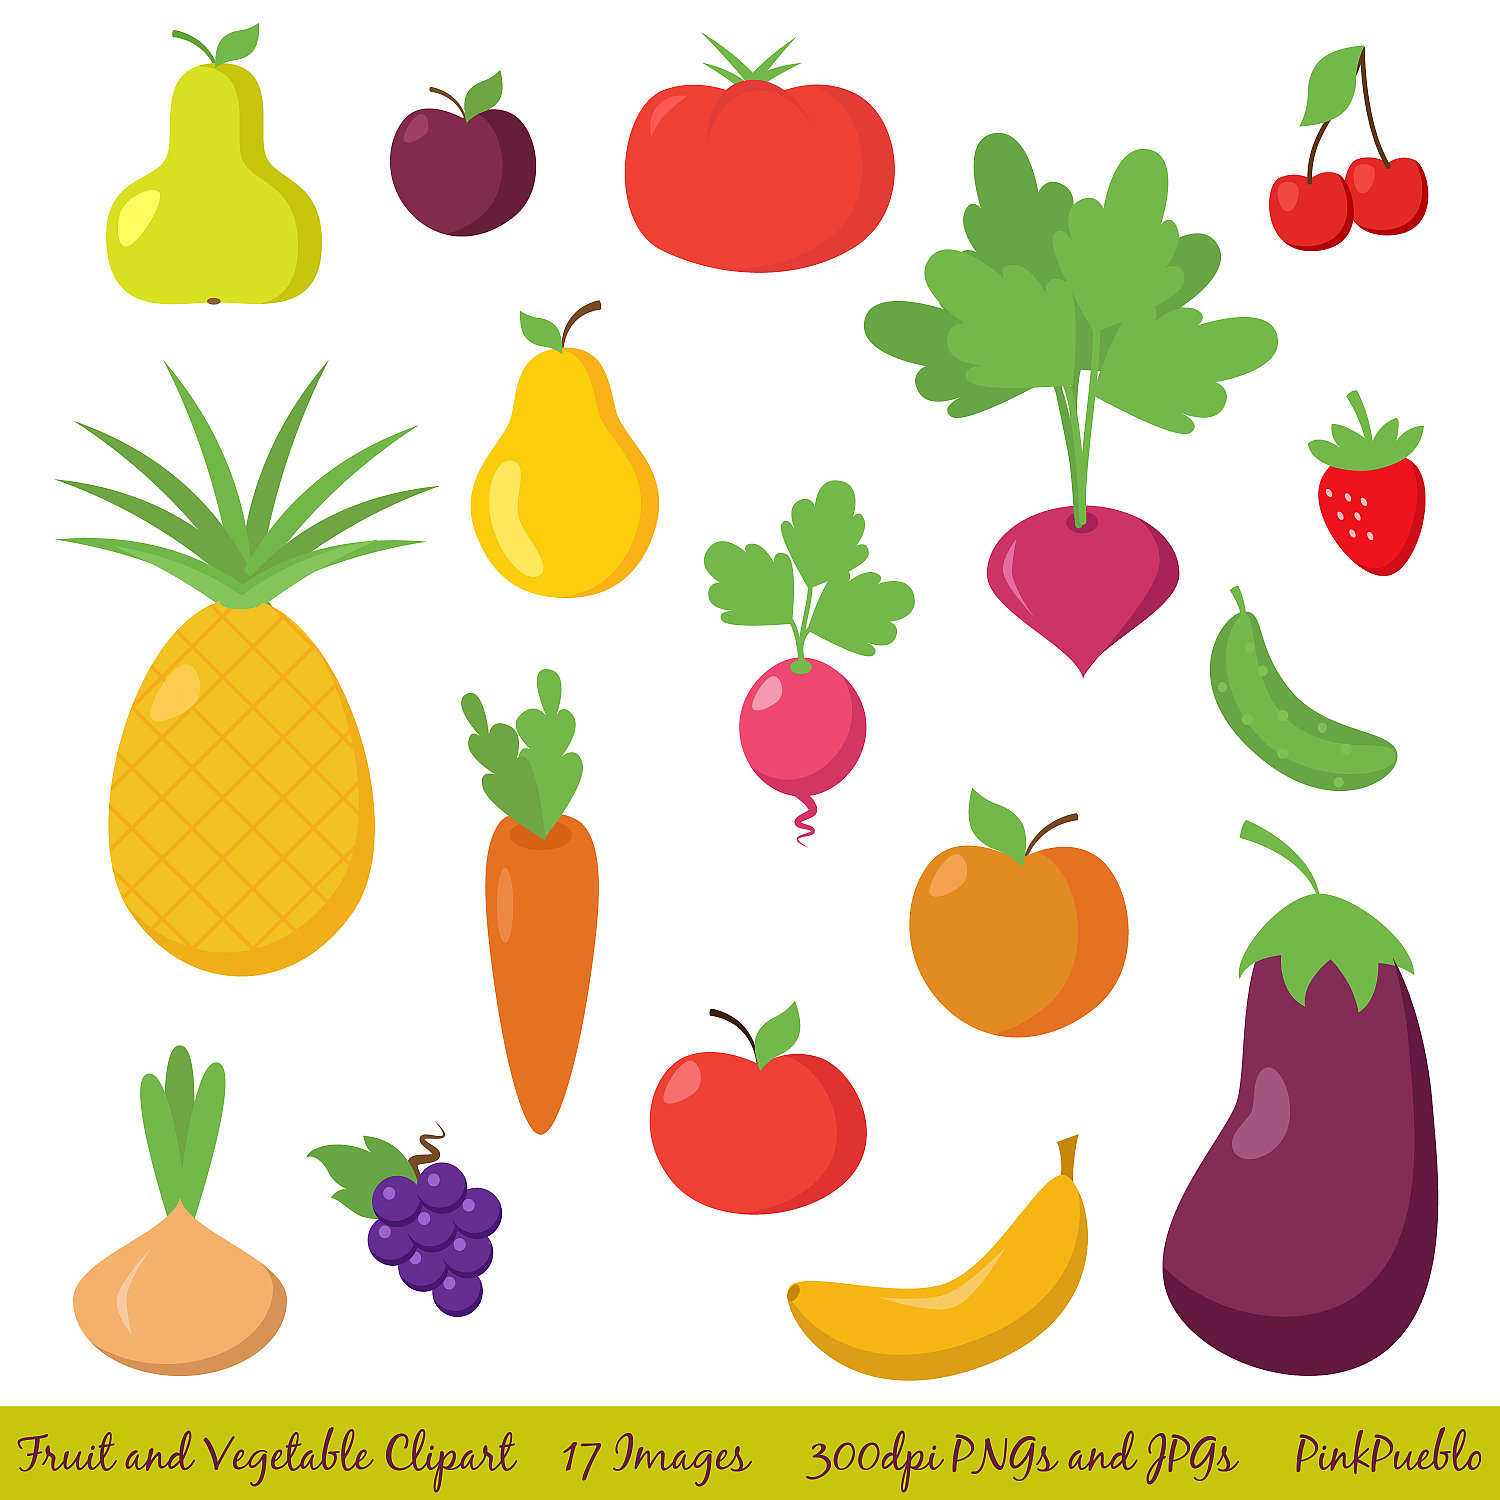 Fruit and Vegetable Clipart C - Fruits Clip Art